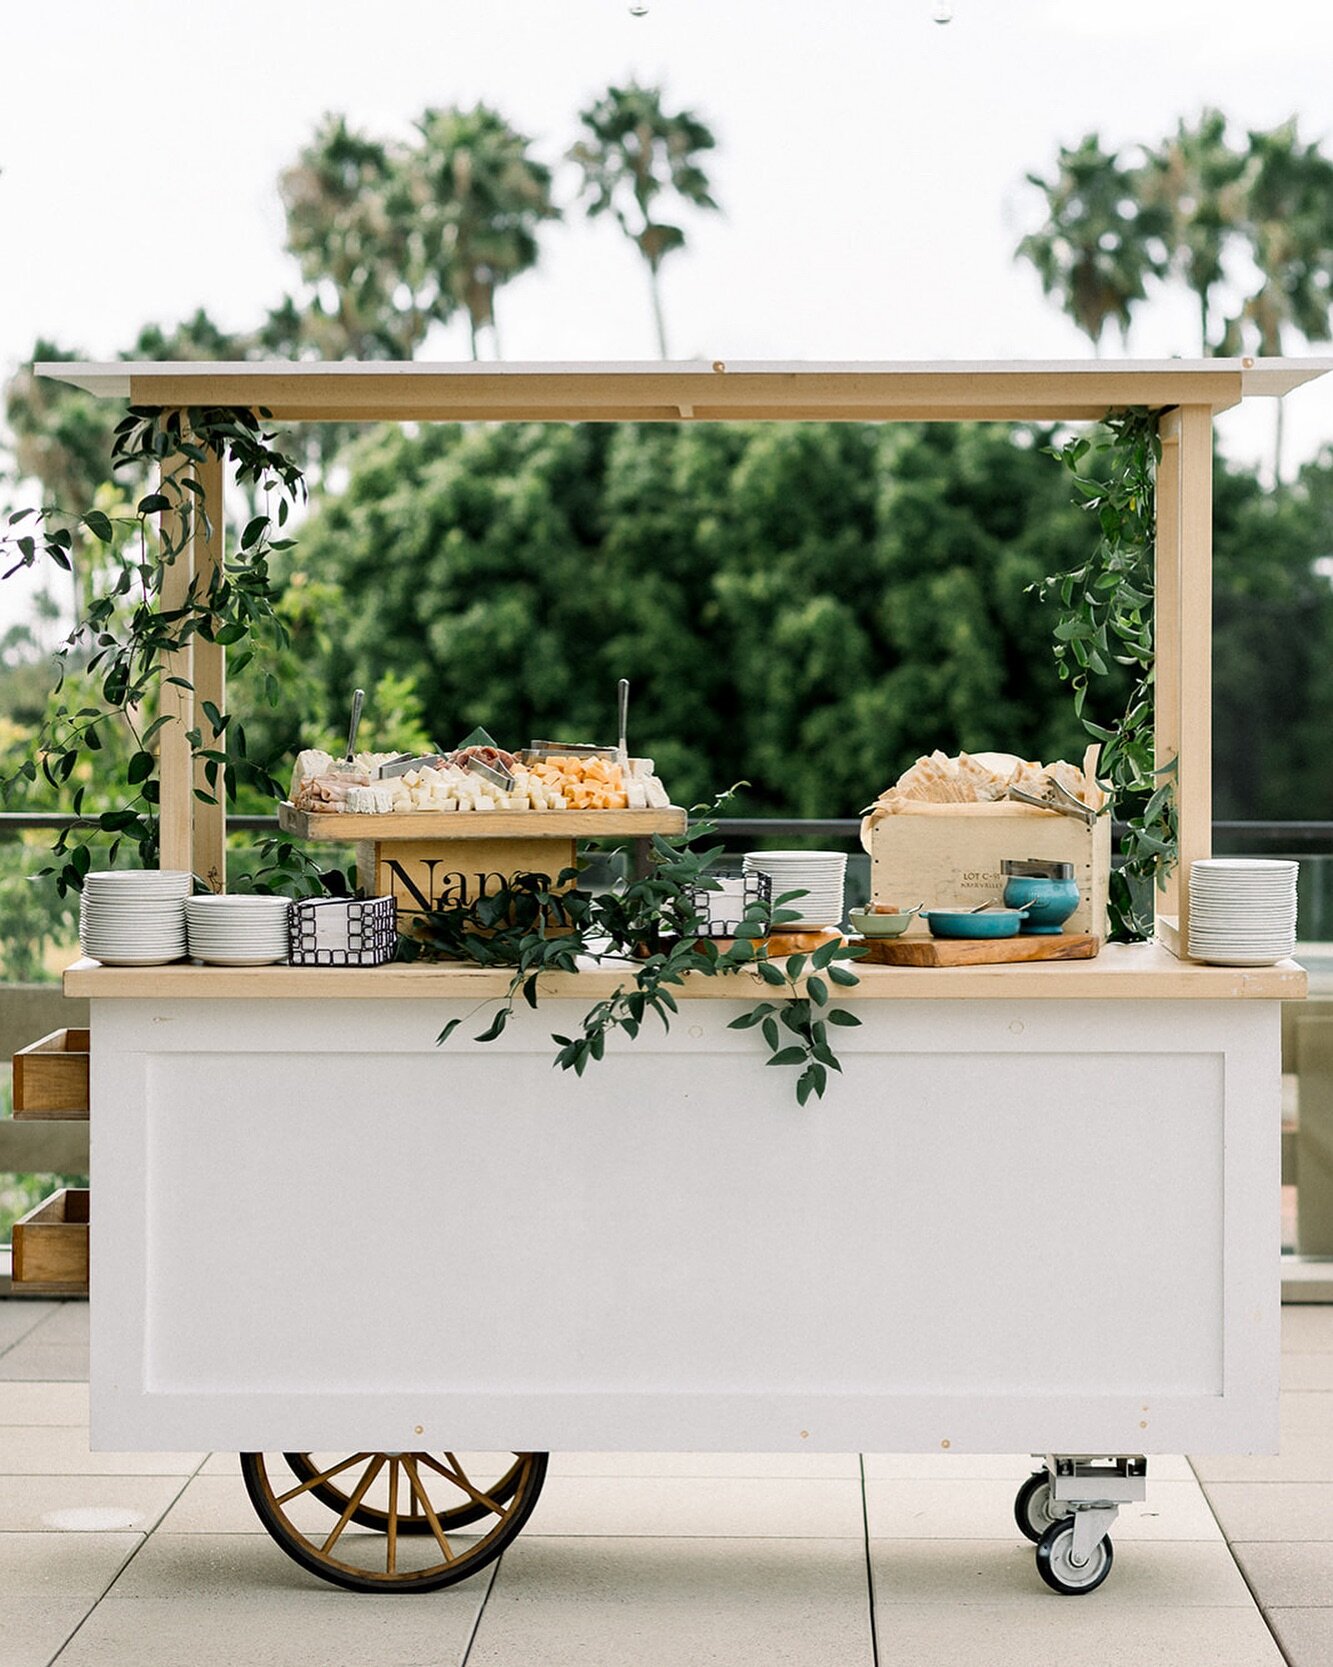 Charcuterie is always a YES, especially when the venue provides the cutest cart that matches your aesthetic! 
⠀⠀⠀⠀⠀⠀⠀⠀⠀
Planning+Design | @blissfullystyledevents
Photo | @hellobluephoto
Florals | @heavenlyblooms
Venue | @newportbeachcc
.
.
.
.
.
.
⠀⠀